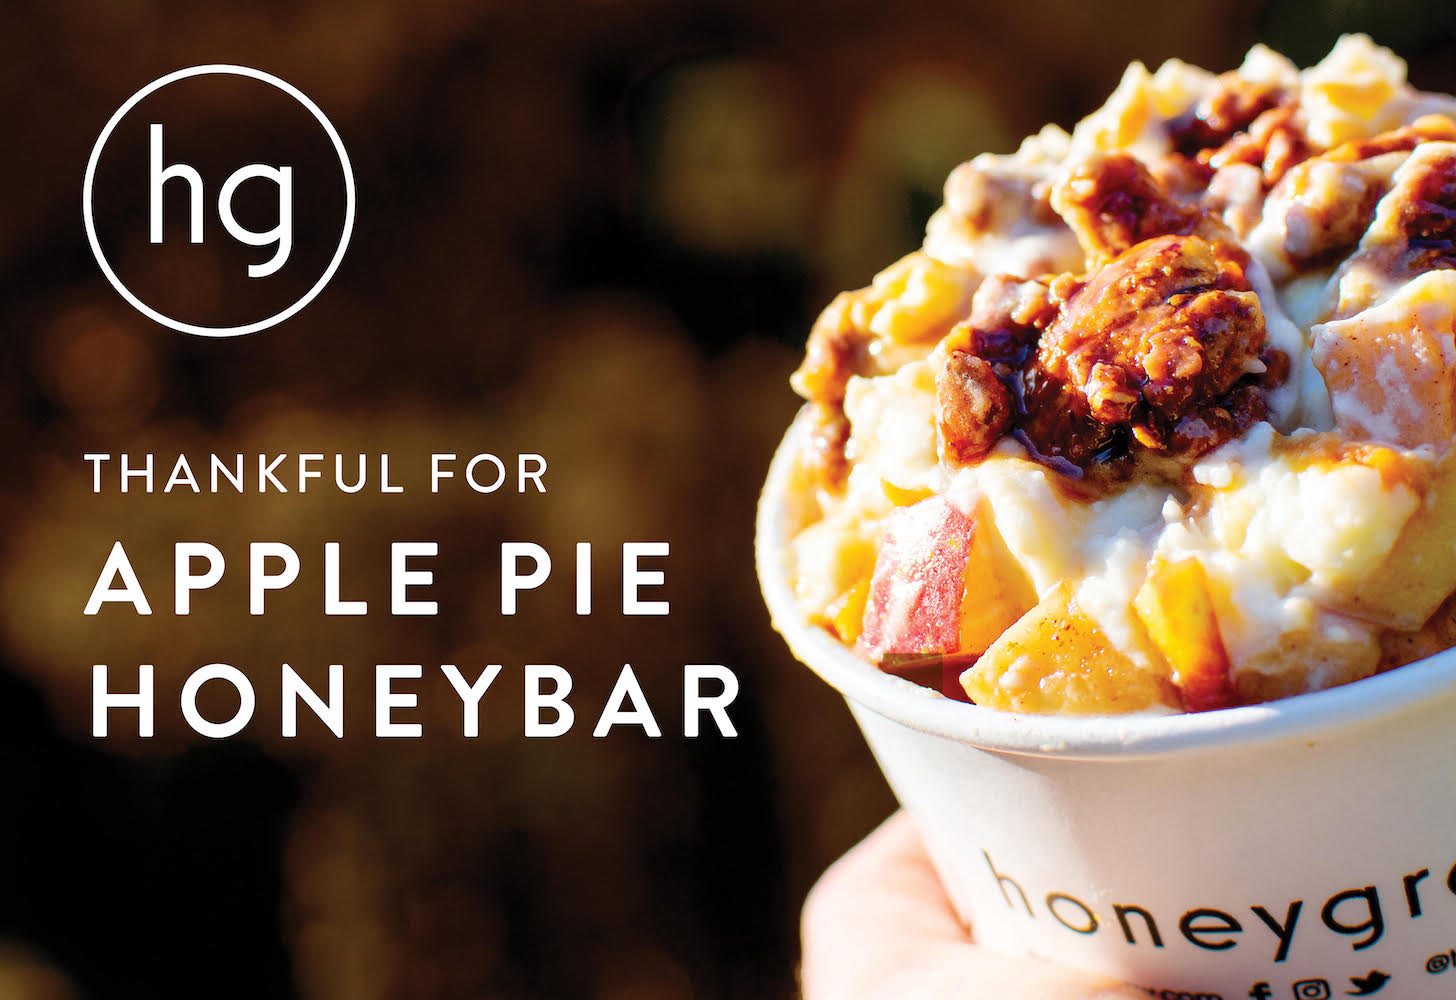 container with "honeygrow" written on it and ice cream, fruit and granola inside